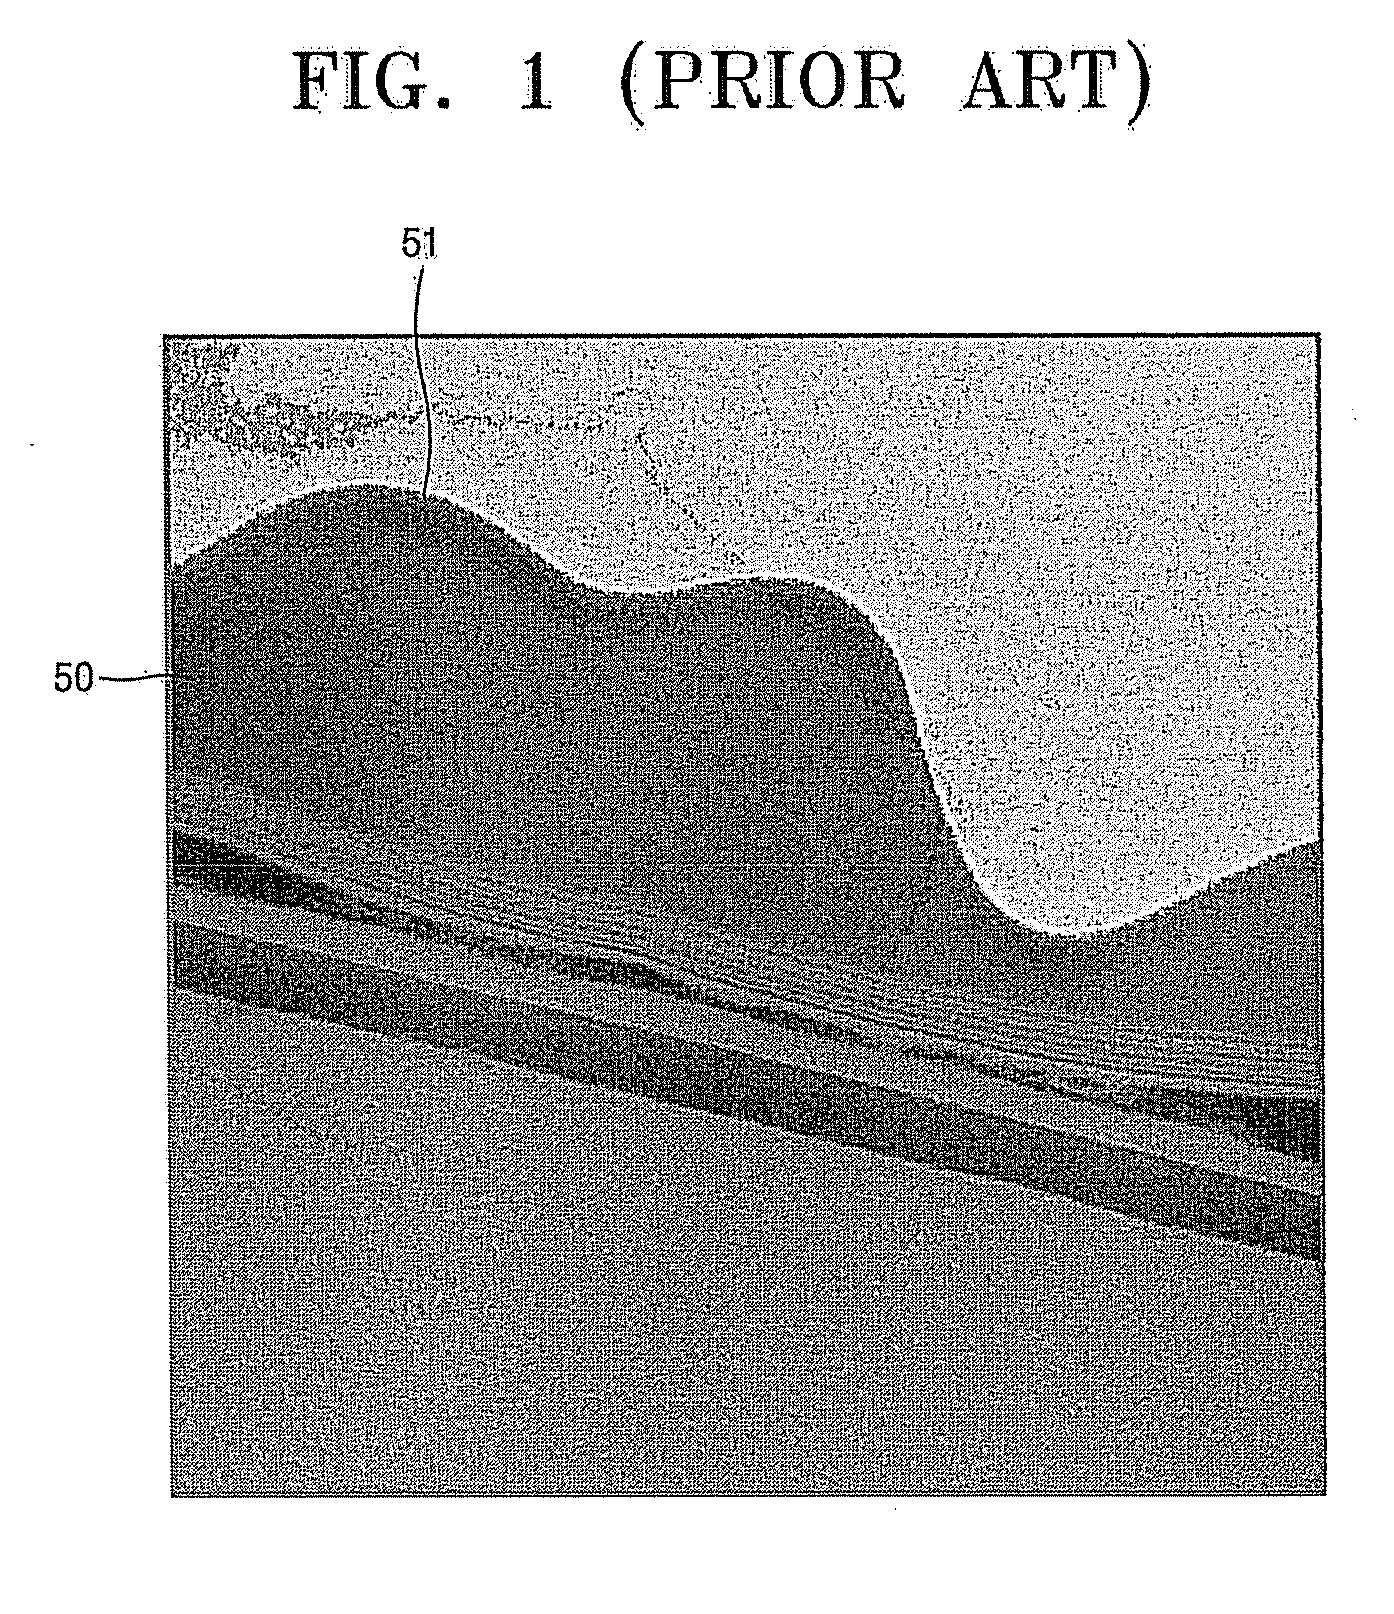 Quantum dot electroluminescence device and method of fabricating the same